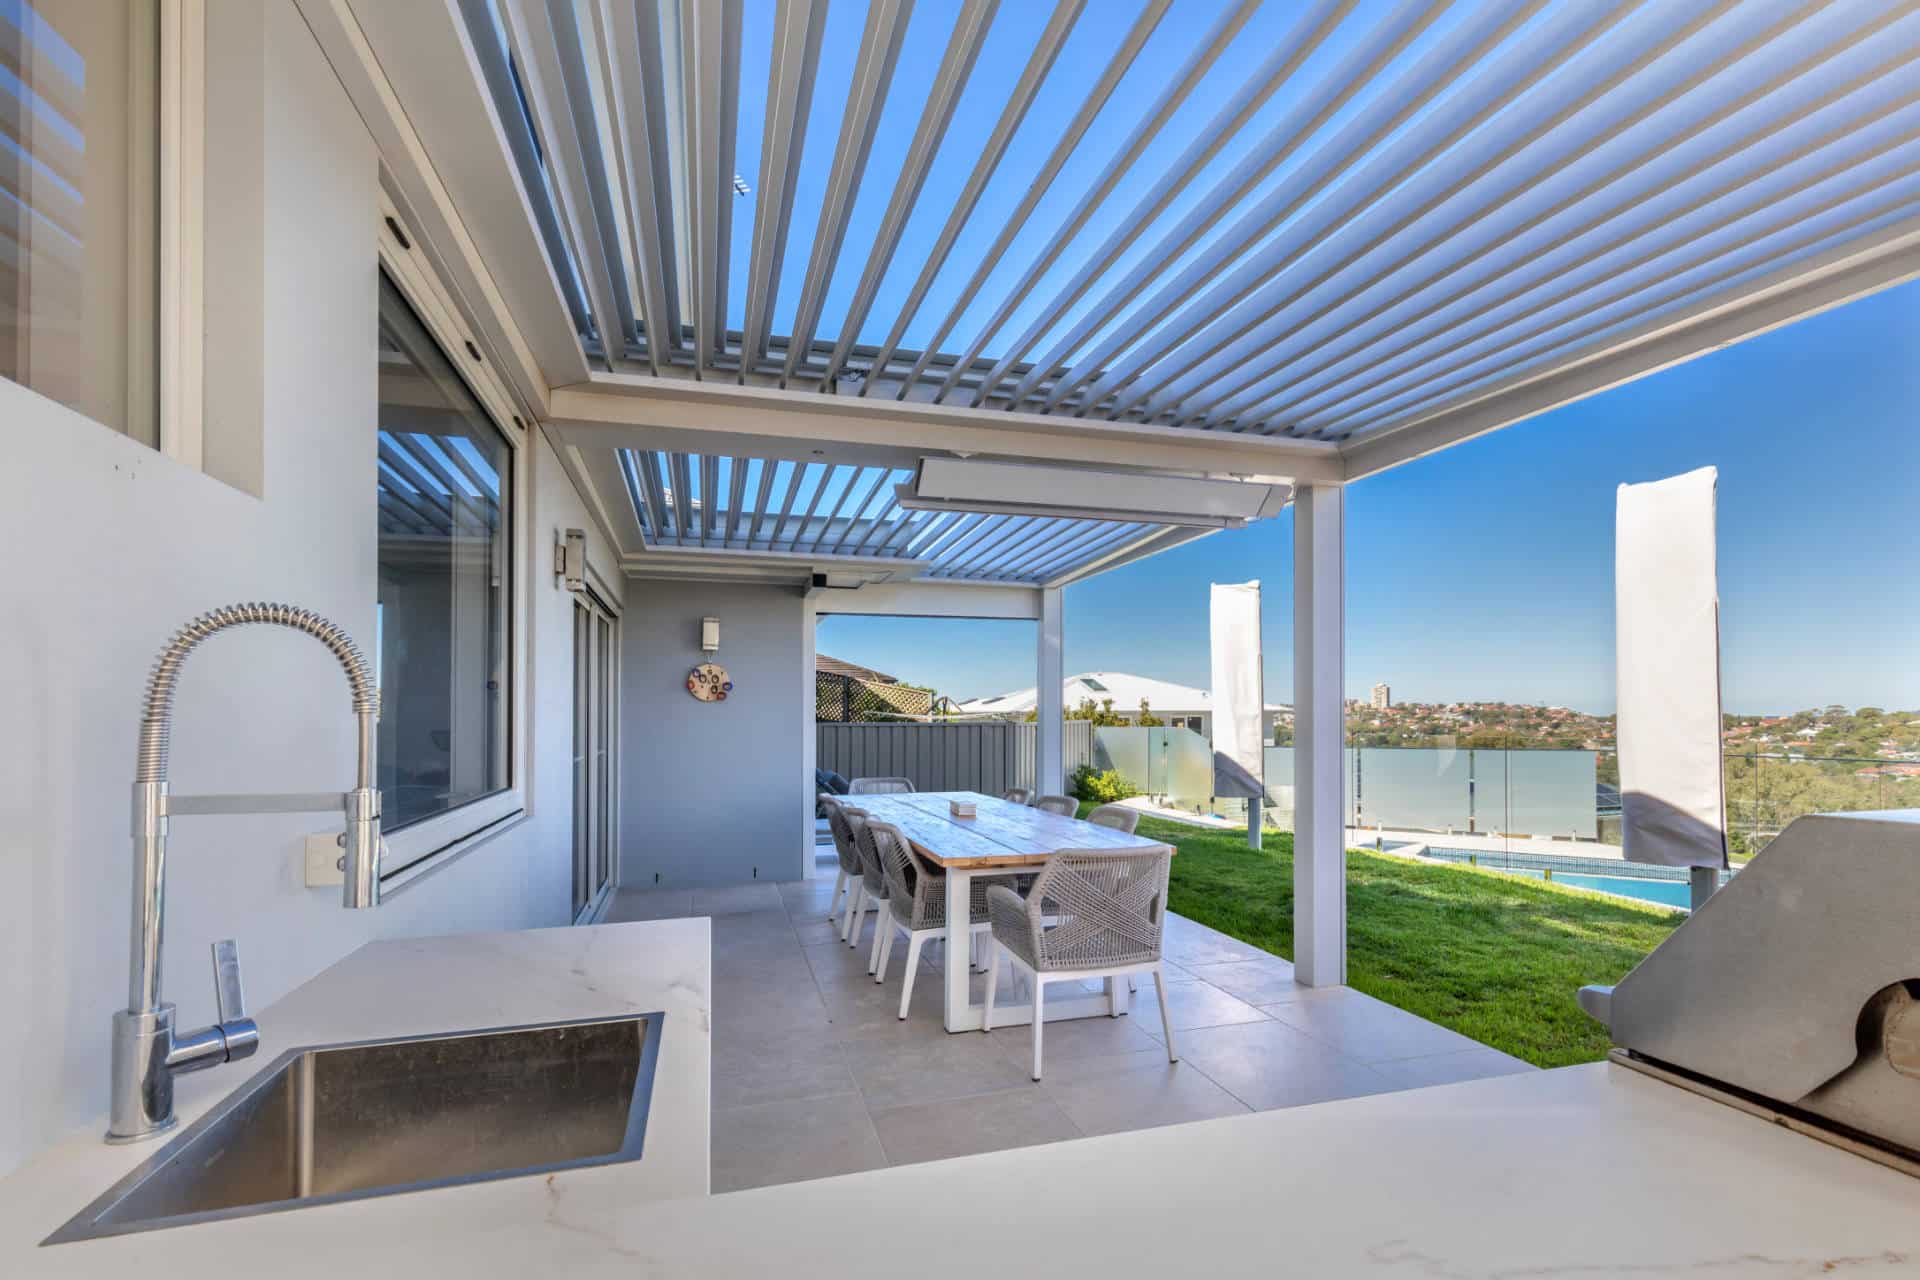 Manly Vale pergola attached to house.